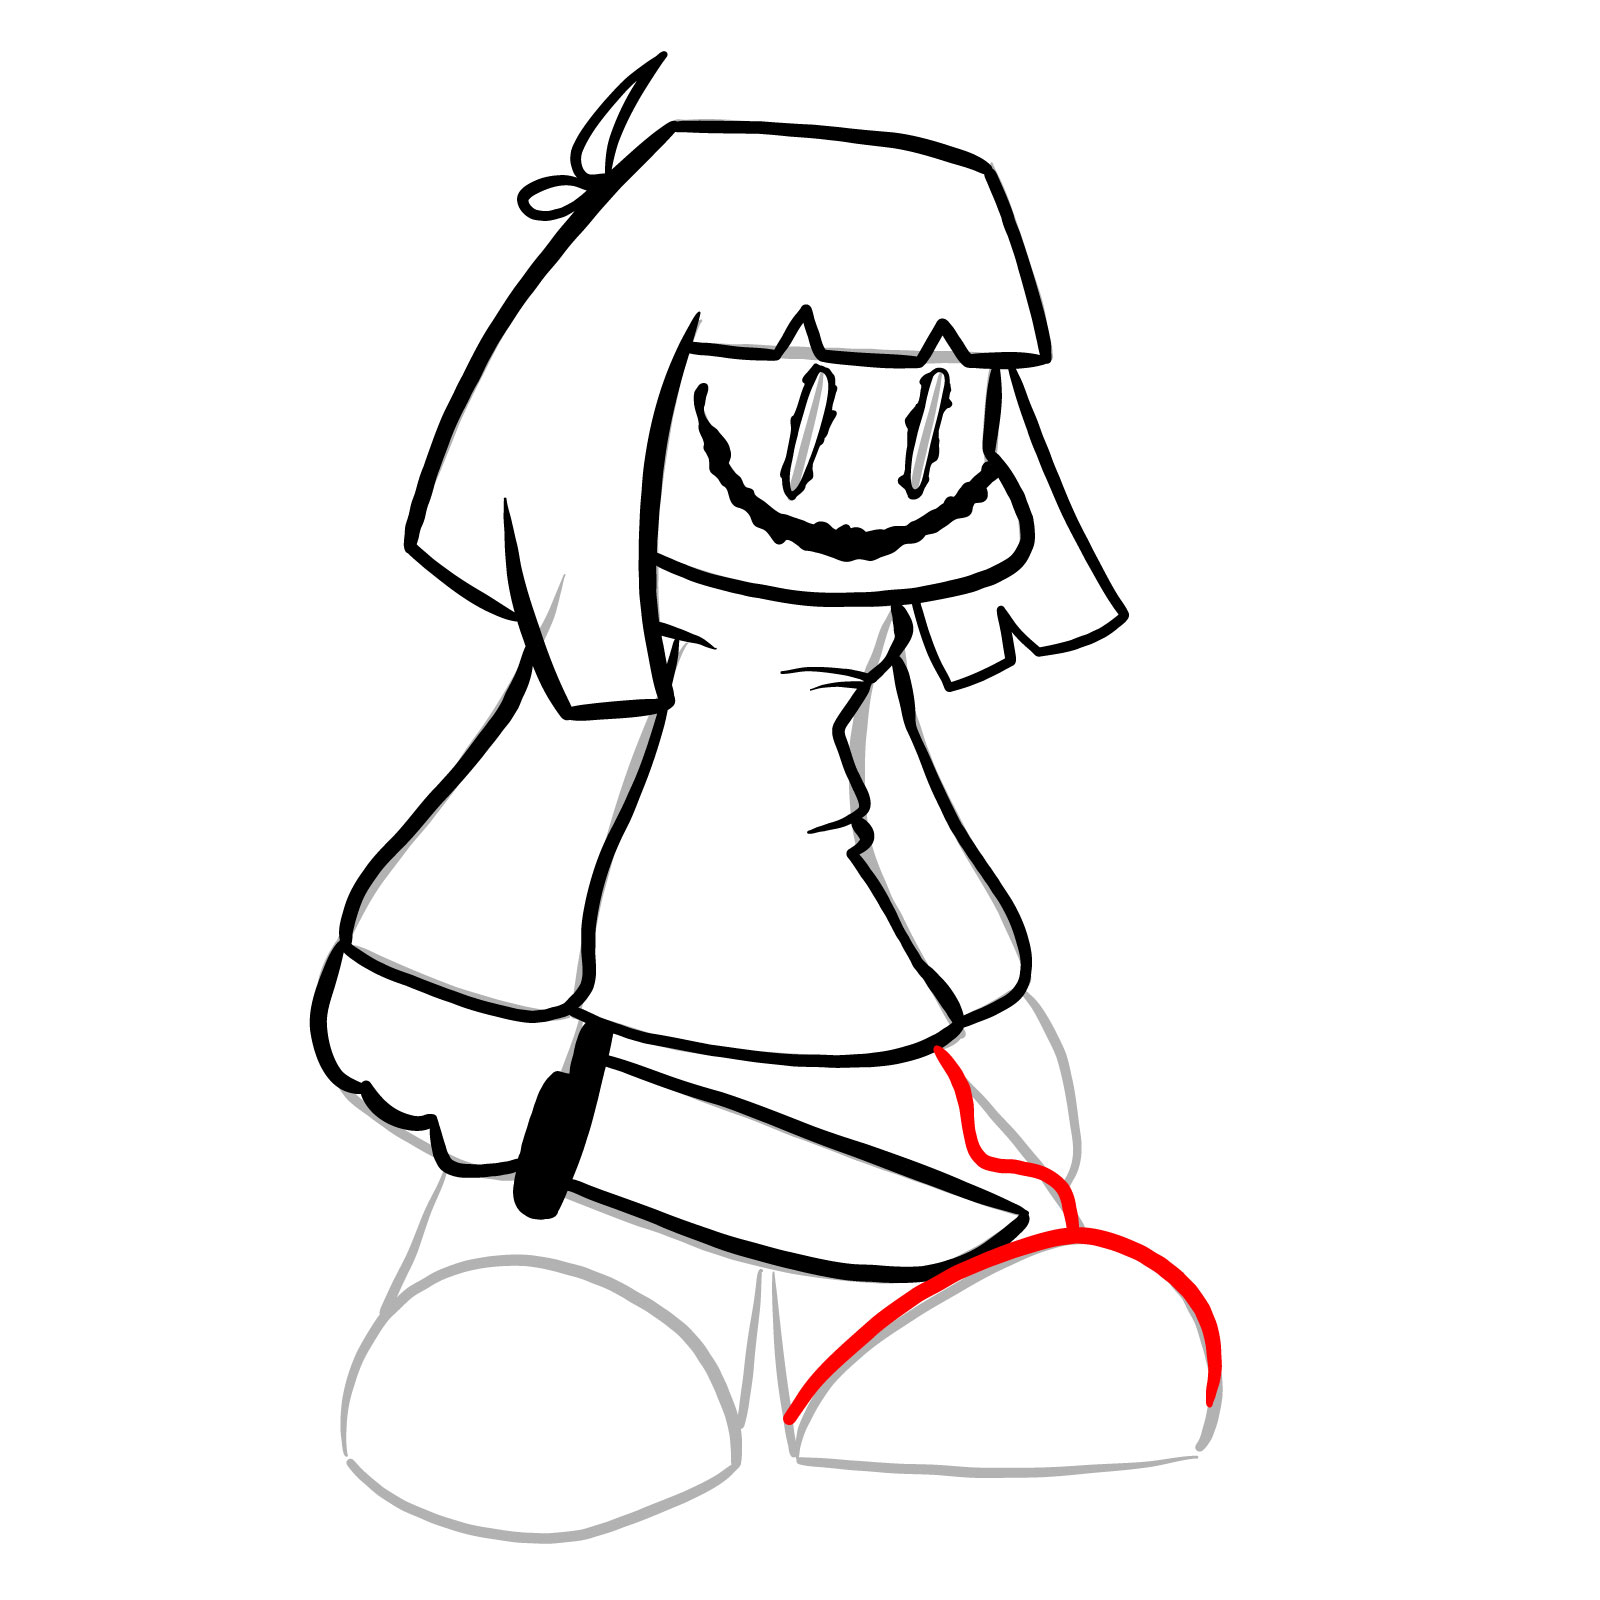 How to draw Chara from Friday Night Dustin' - step 17